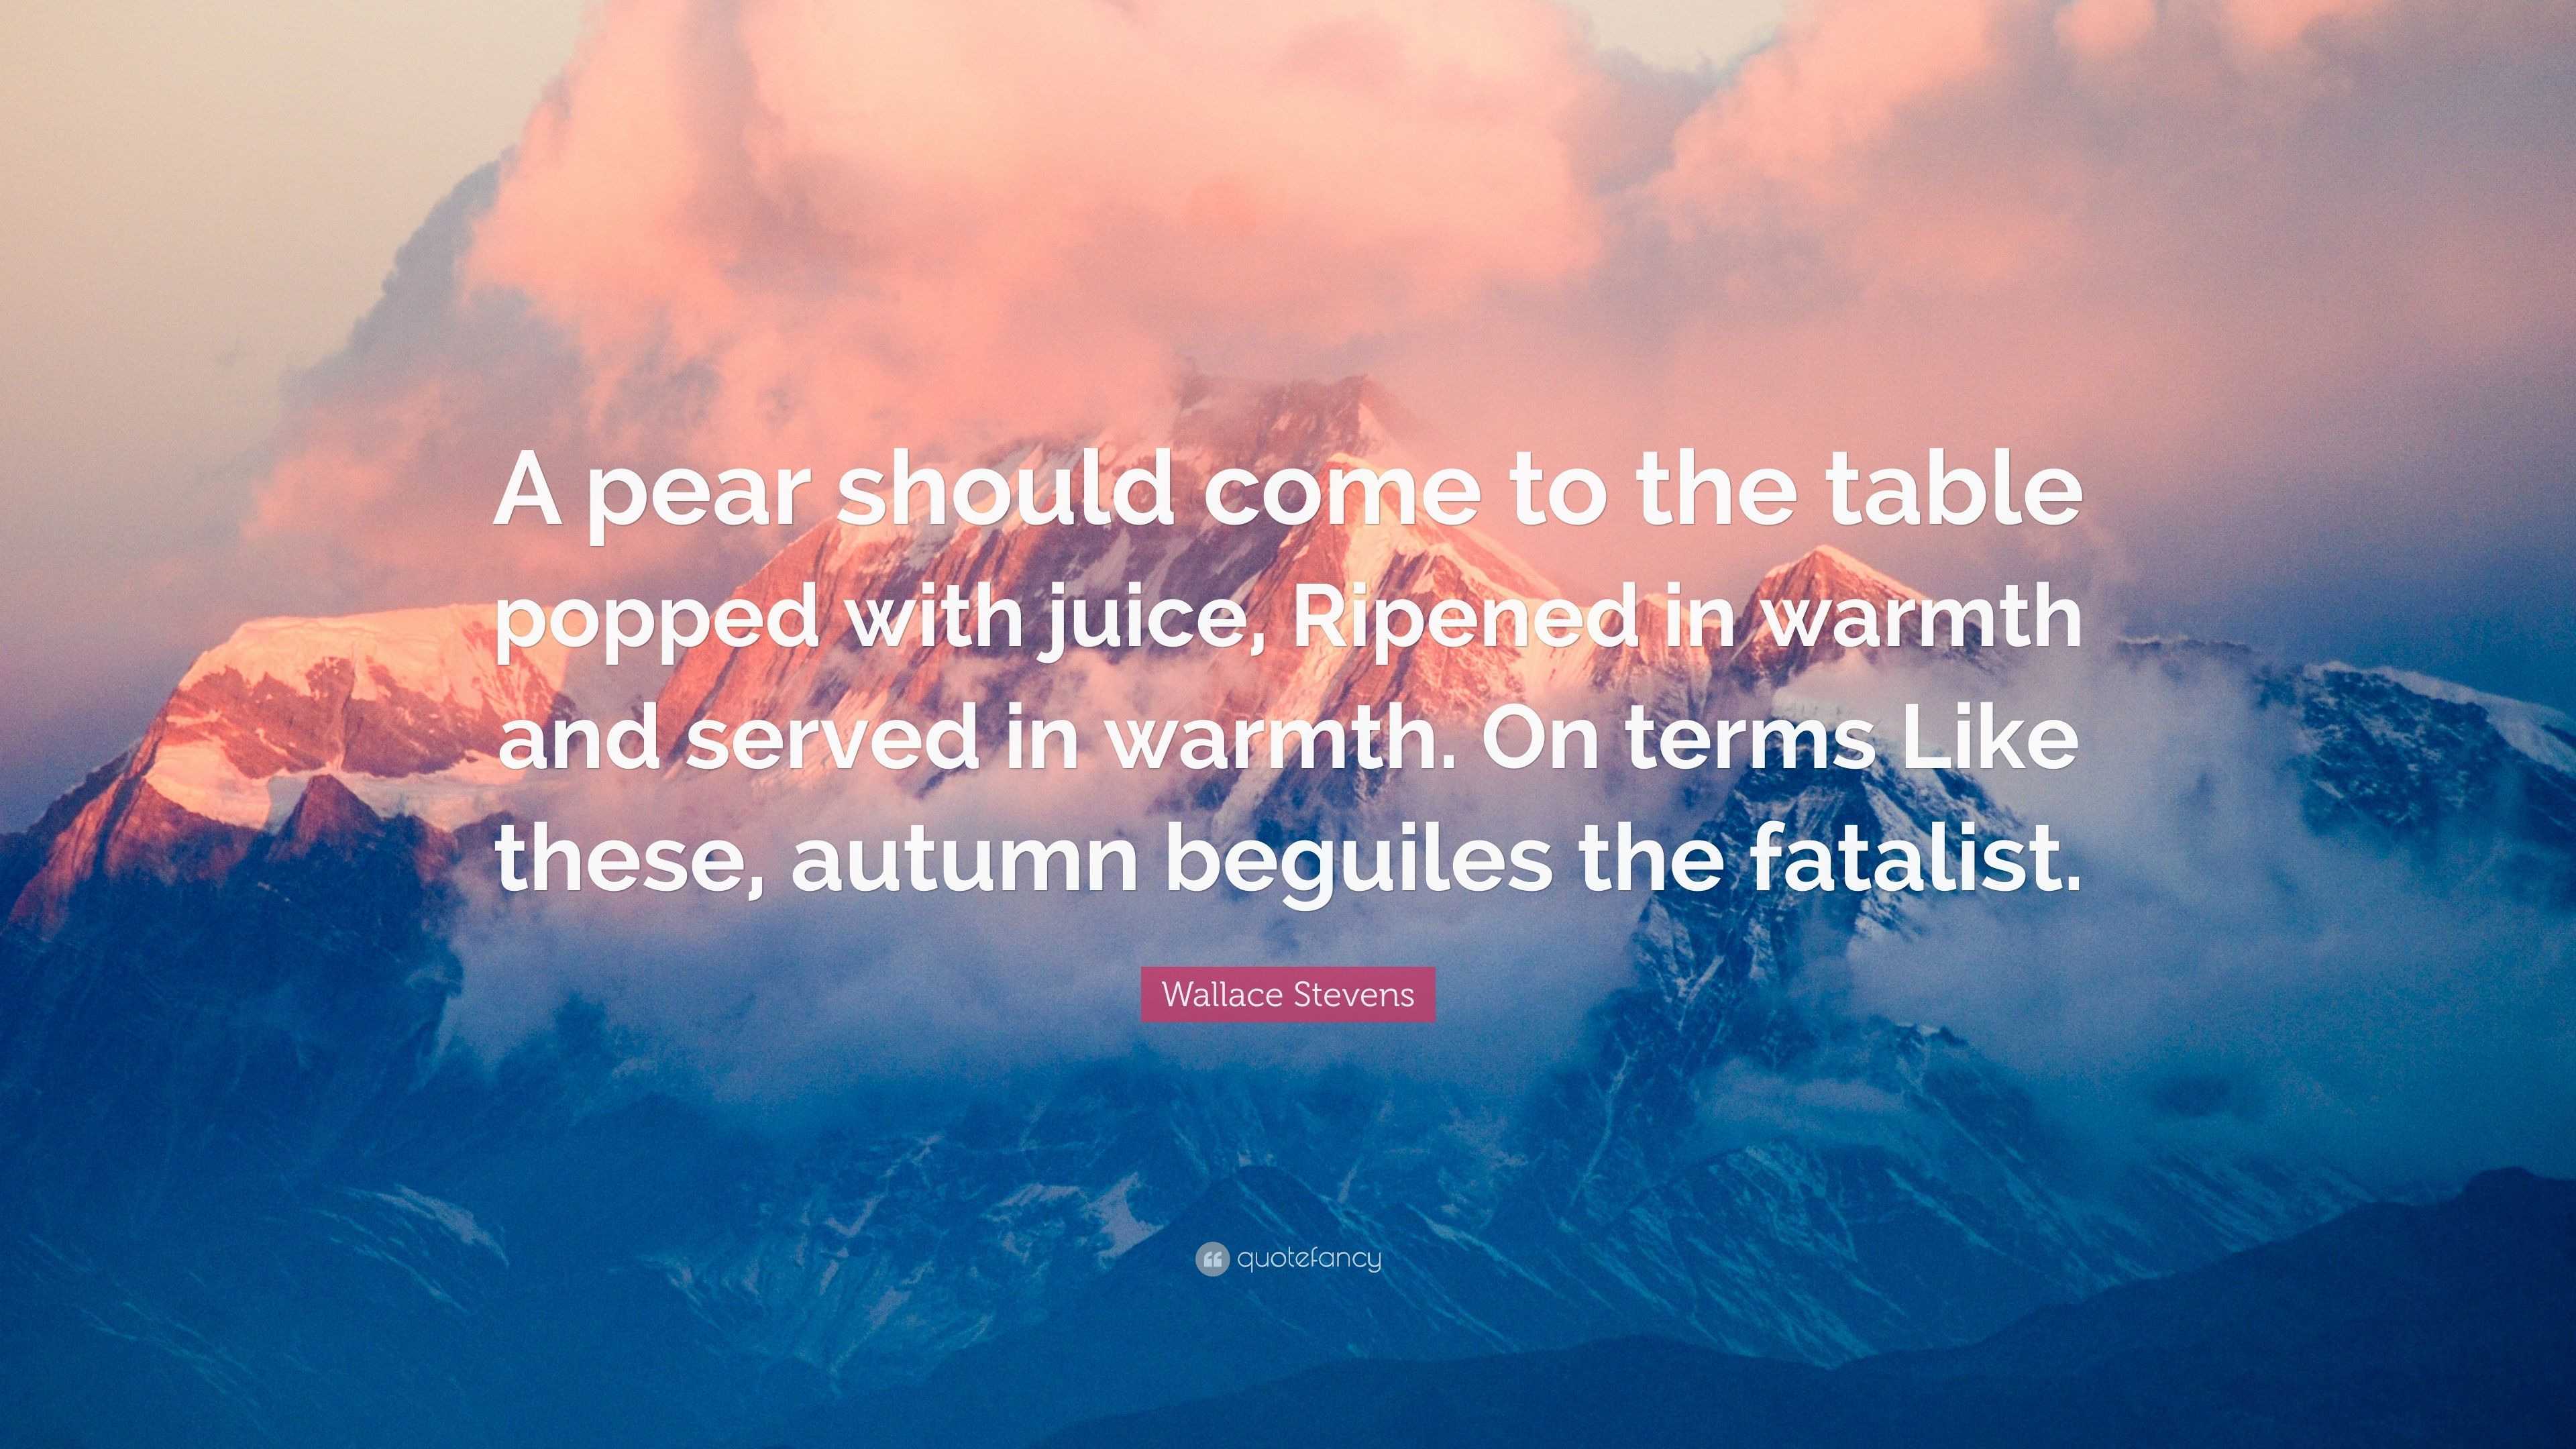 Wallace Stevens Quote: “A pear should come to the table popped